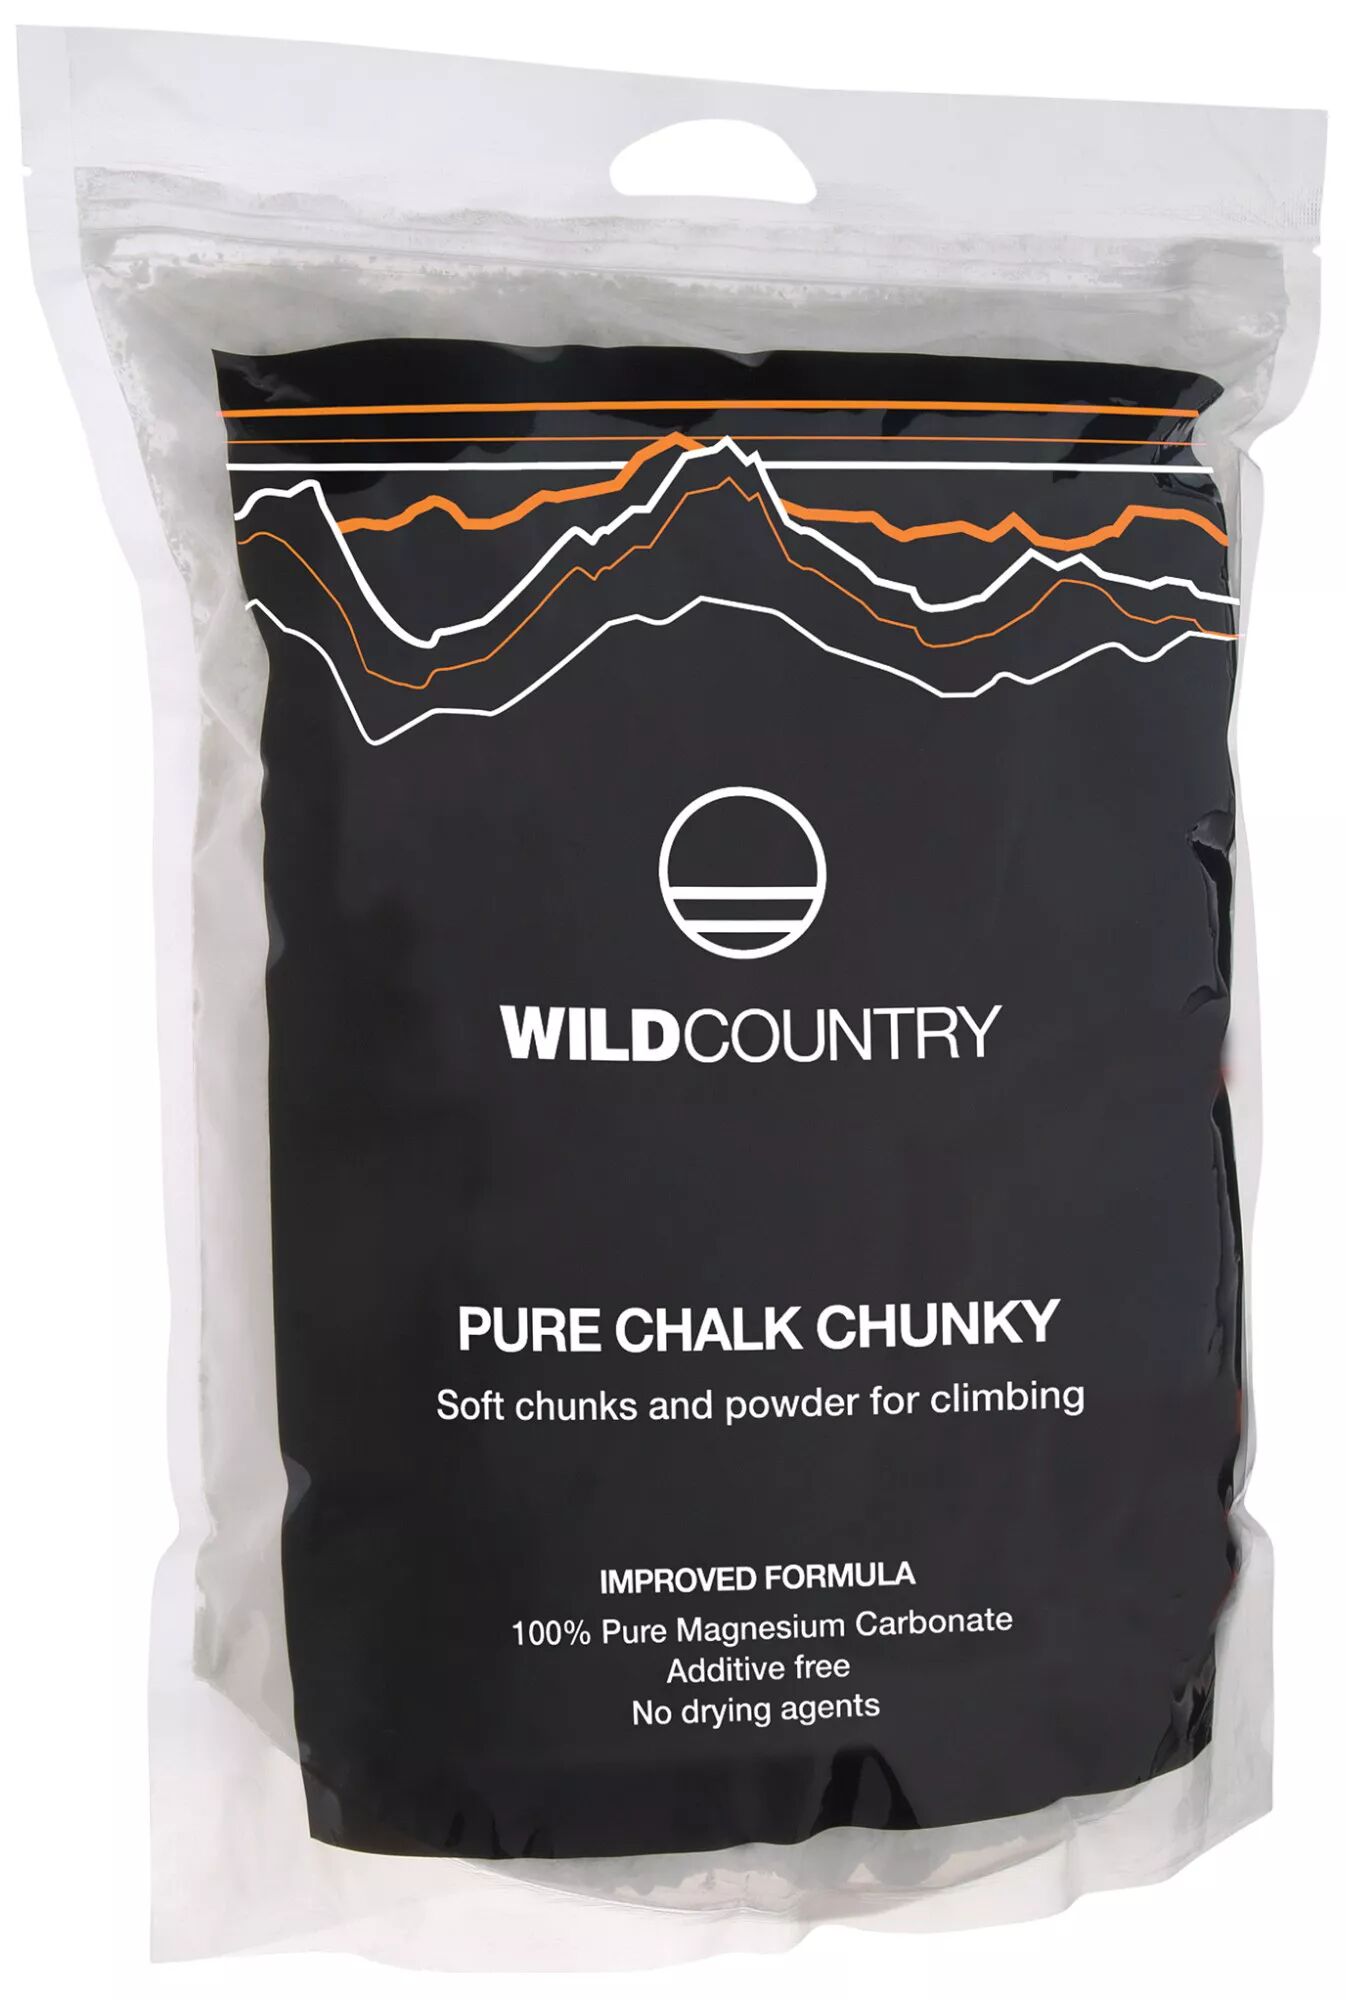 Photos - Outdoor Furniture Wild Country WILDCOUNTRY  Pure Chalk- Chunky 1KG 23dyruprchlkchnkycac 